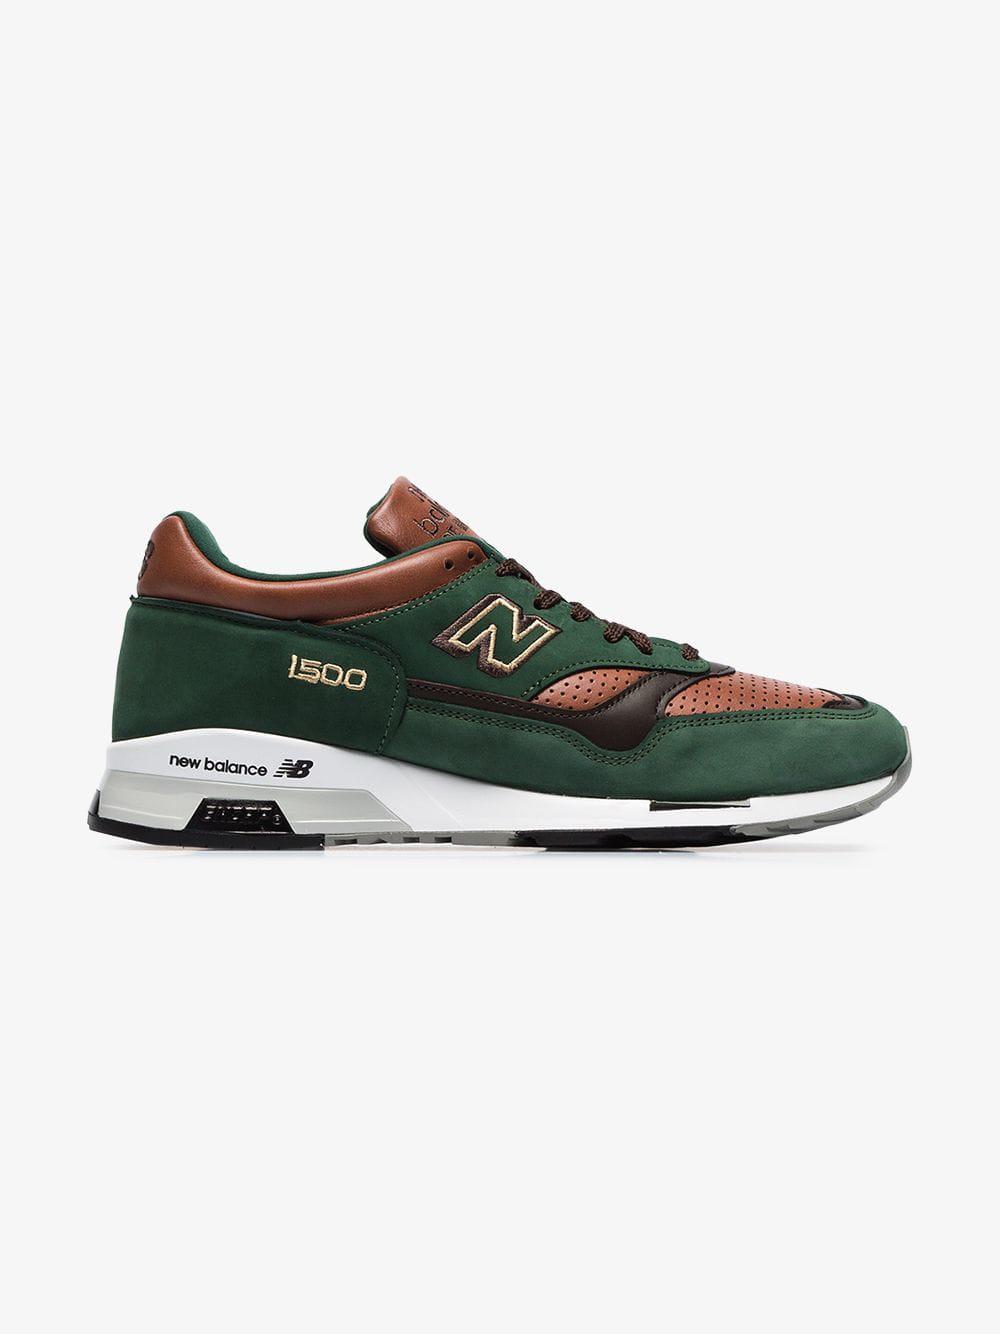 ♂✁New Balance official authentic flagship store n word shoes women s shoes  running shoes casual spor | Shopee Philippines